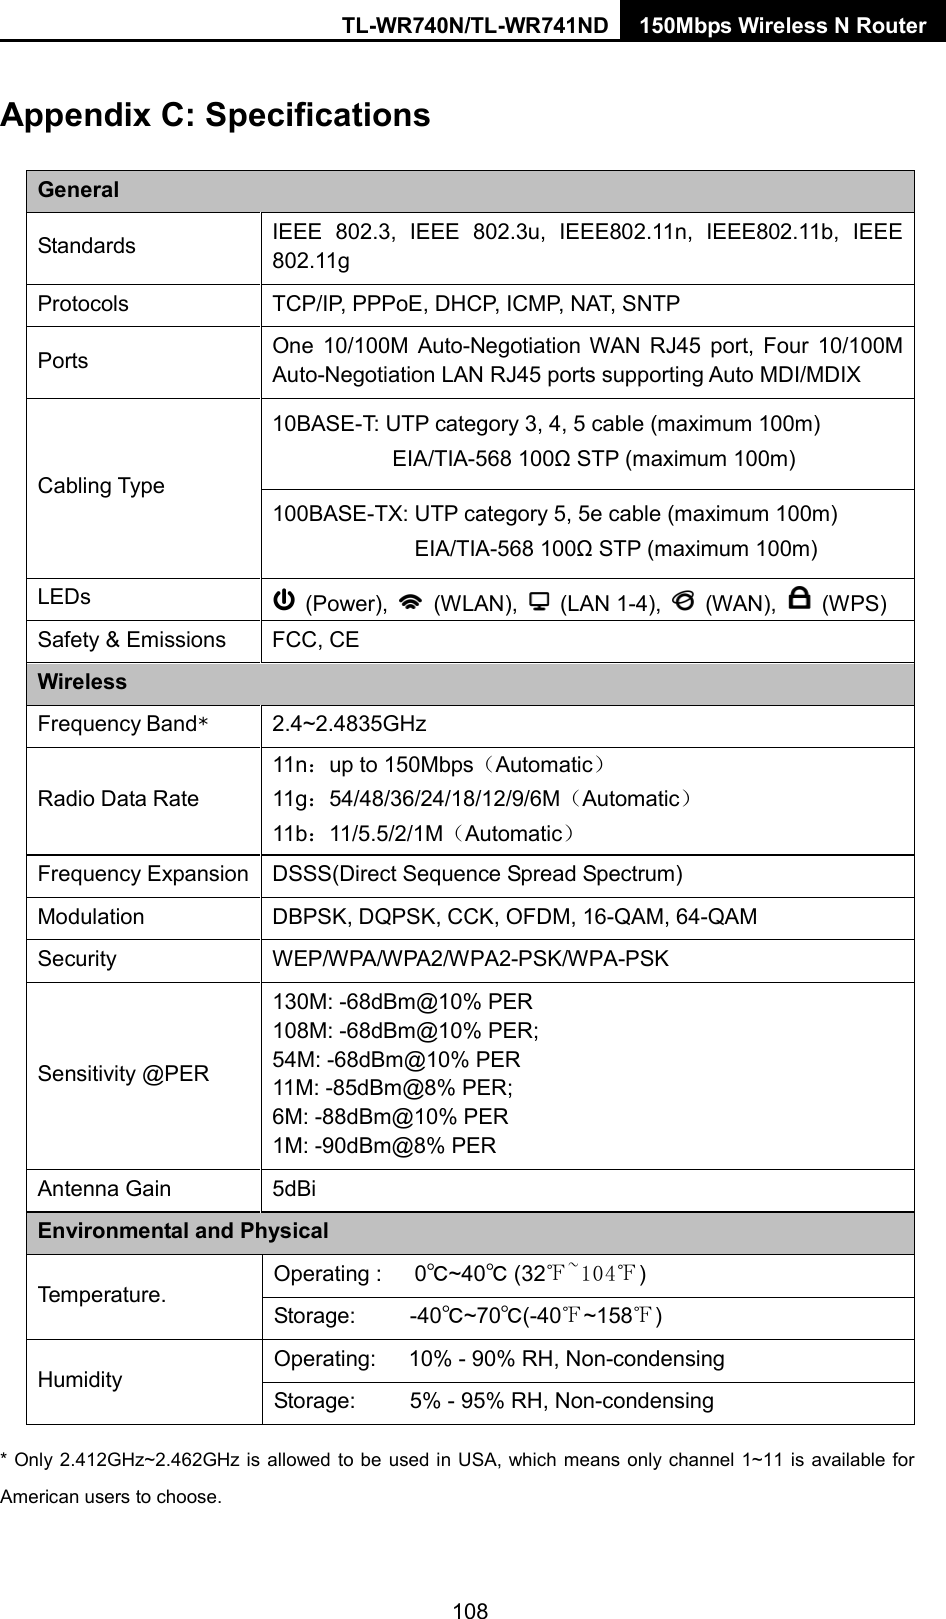 TL-WR740N/TL-WR741ND 150Mbps Wireless N Router  Appendix C: Specifications General Standards IEEE 802.3, IEEE  802.3u,  IEEE802.11n,  IEEE802.11b,  IEEE 802.11g Protocols TCP/IP, PPPoE, DHCP, ICMP, NAT, SNTP Ports One 10/100M Auto-Negotiation WAN RJ45 port, Four 10/100M Auto-Negotiation LAN RJ45 ports supporting Auto MDI/MDIX Cabling Type 10BASE-T: UTP category 3, 4, 5 cable (maximum 100m) EIA/TIA-568 100Ω STP (maximum 100m) 100BASE-TX: UTP category 5, 5e cable (maximum 100m) EIA/TIA-568 100Ω STP (maximum 100m) LEDs   (Power),   (WLAN),   (LAN 1-4),    (WAN),    (WPS) Safety &amp; Emissions FCC, CE Wireless Frequency Band* 2.4~2.4835GHz Radio Data Rate 11n：up to 150Mbps（Automatic） 11g：54/48/36/24/18/12/9/6M（Automatic） 11b：11/5.5/2/1M（Automatic） Frequency Expansion DSSS(Direct Sequence Spread Spectrum) Modulation DBPSK, DQPSK, CCK, OFDM, 16-QAM, 64-QAM Security WEP/WPA/WPA2/WPA2-PSK/WPA-PSK Sensitivity @PER 130M: -68dBm@10% PER 108M: -68dBm@10% PER;   54M: -68dBm@10% PER 11M: -85dBm@8% PER;   6M: -88dBm@10% PER 1M: -90dBm@8% PER Antenna Gain  5dBi Environmental and Physical Te m perature. Operating :   0℃~40℃ (32℉~104℉) Storage:     -40℃~70℃(-40℉~158℉) Humidity Operating:   10% - 90% RH, Non-condensing Storage:     5% - 95% RH, Non-condensing * Only 2.412GHz~2.462GHz is allowed to be used in USA, which means only channel 1~11 is available for American users to choose. 108 